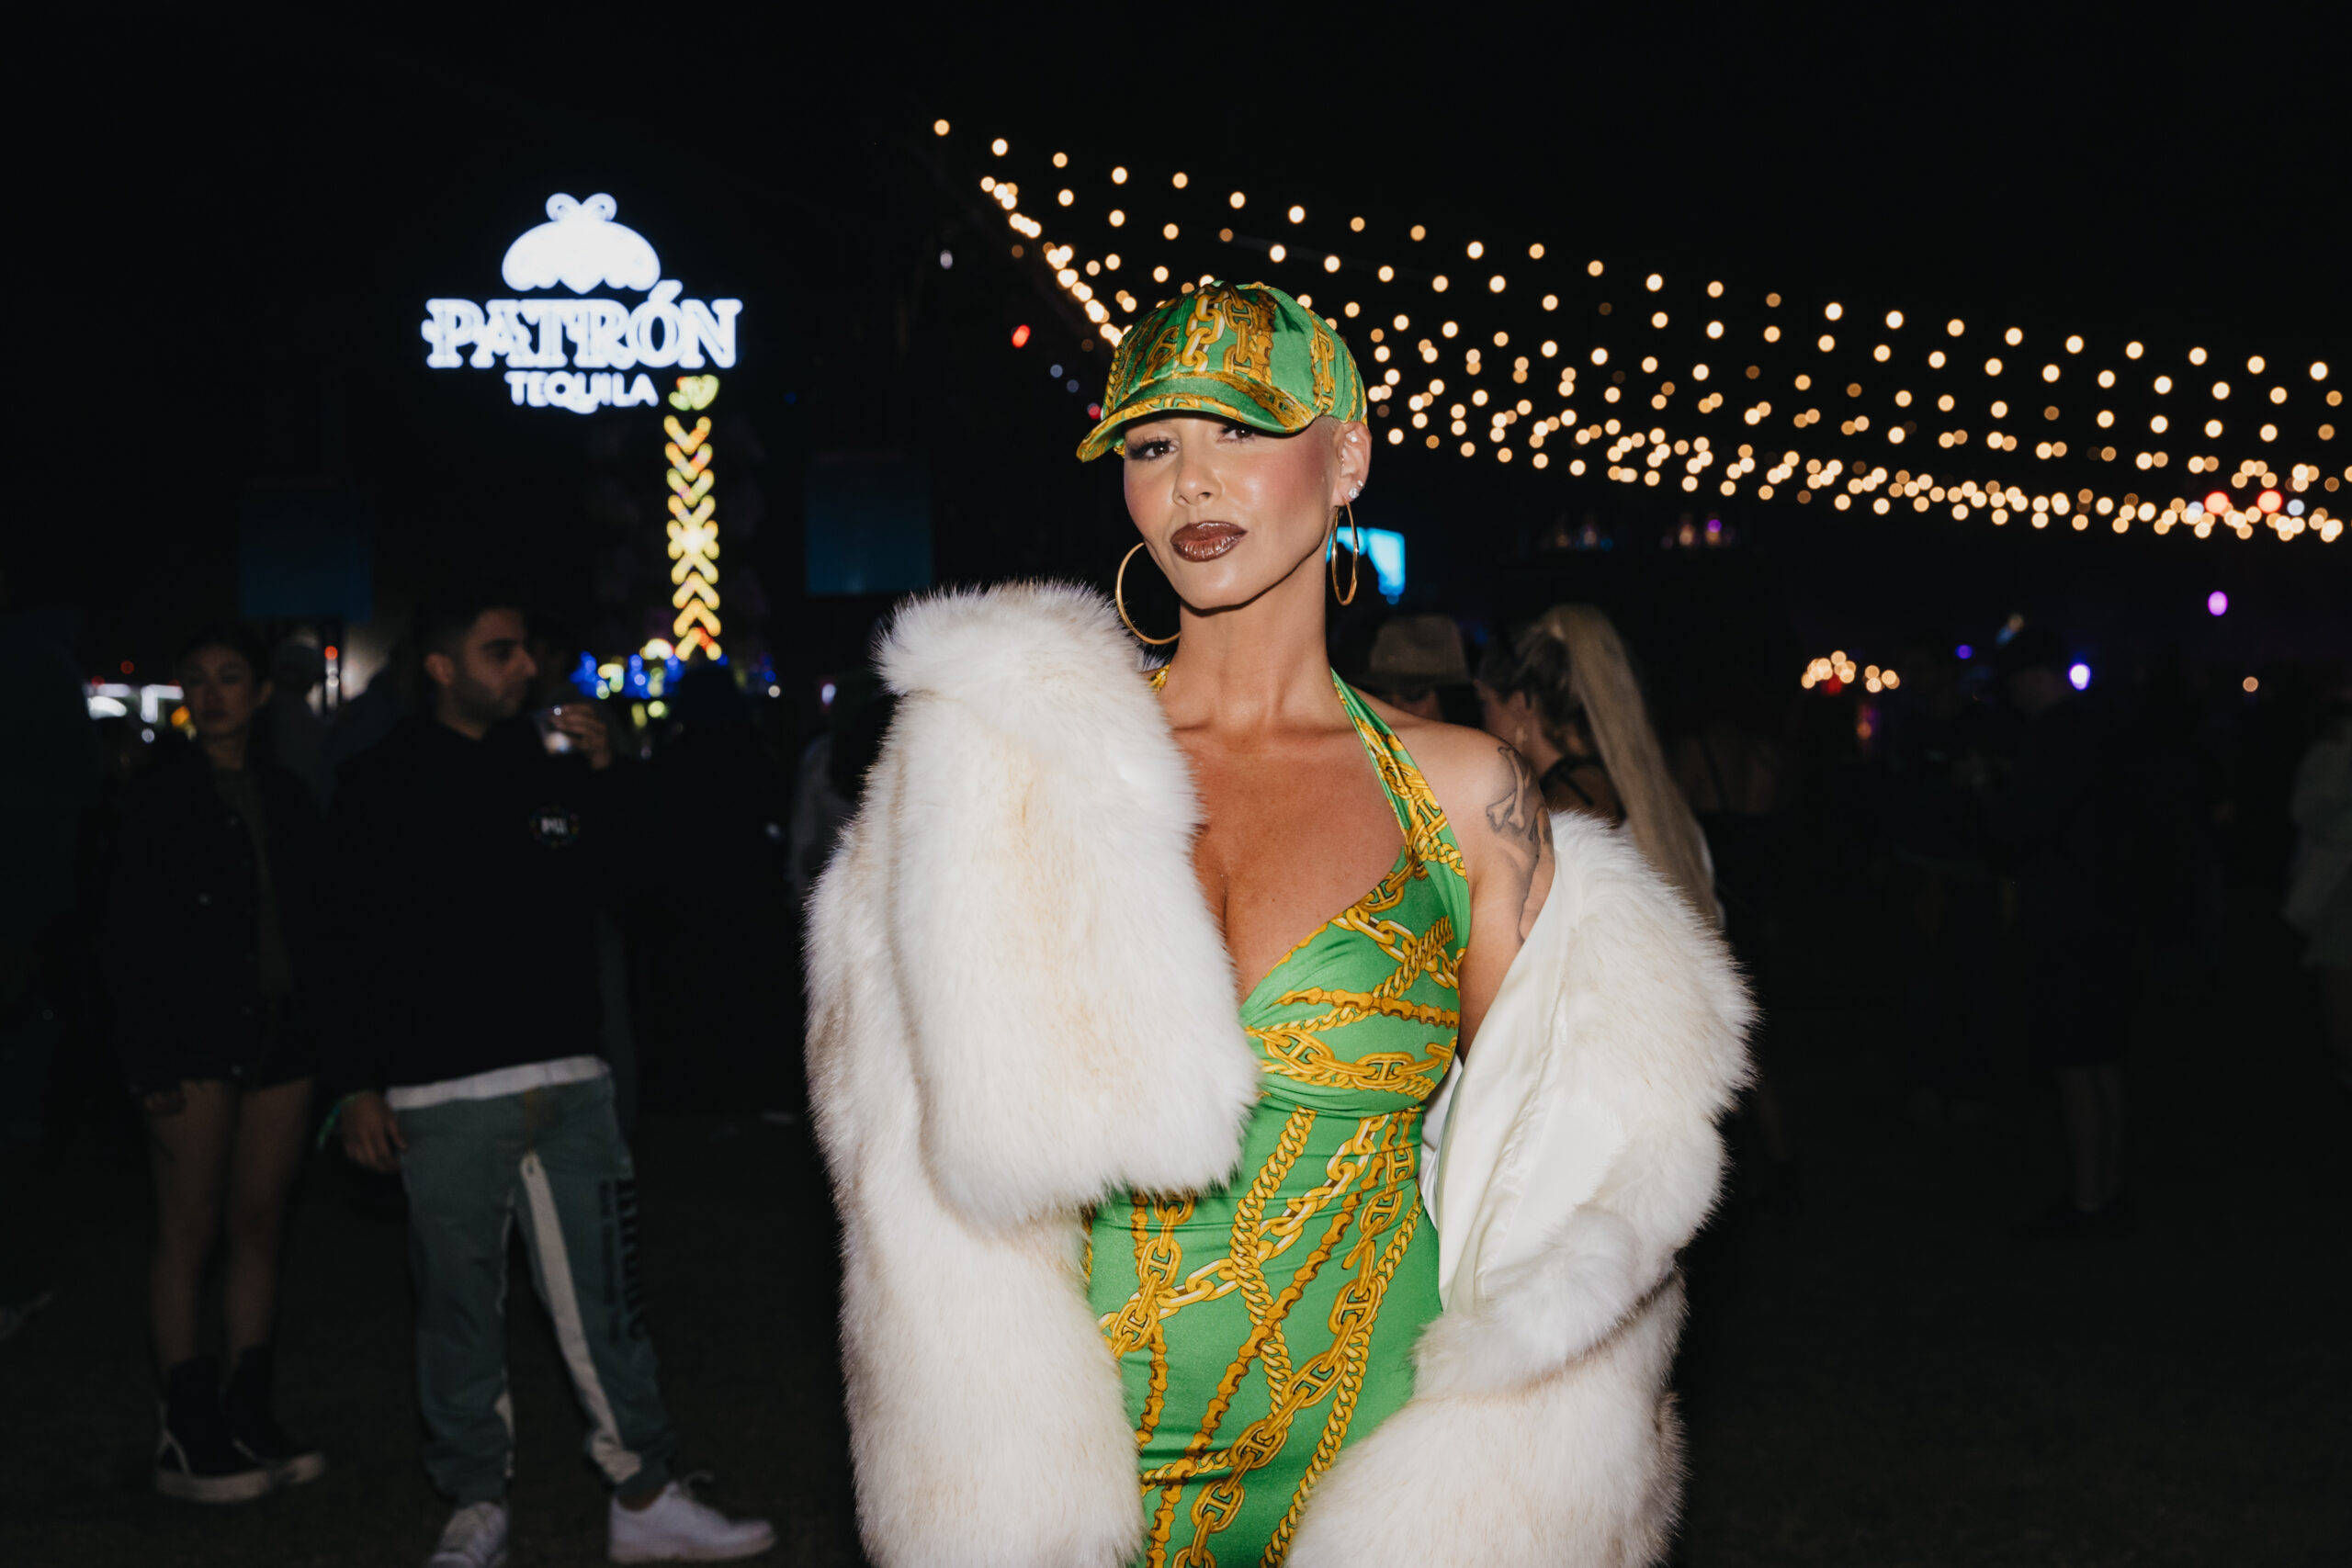 Amber Rose photographed by Angel Montalvo.